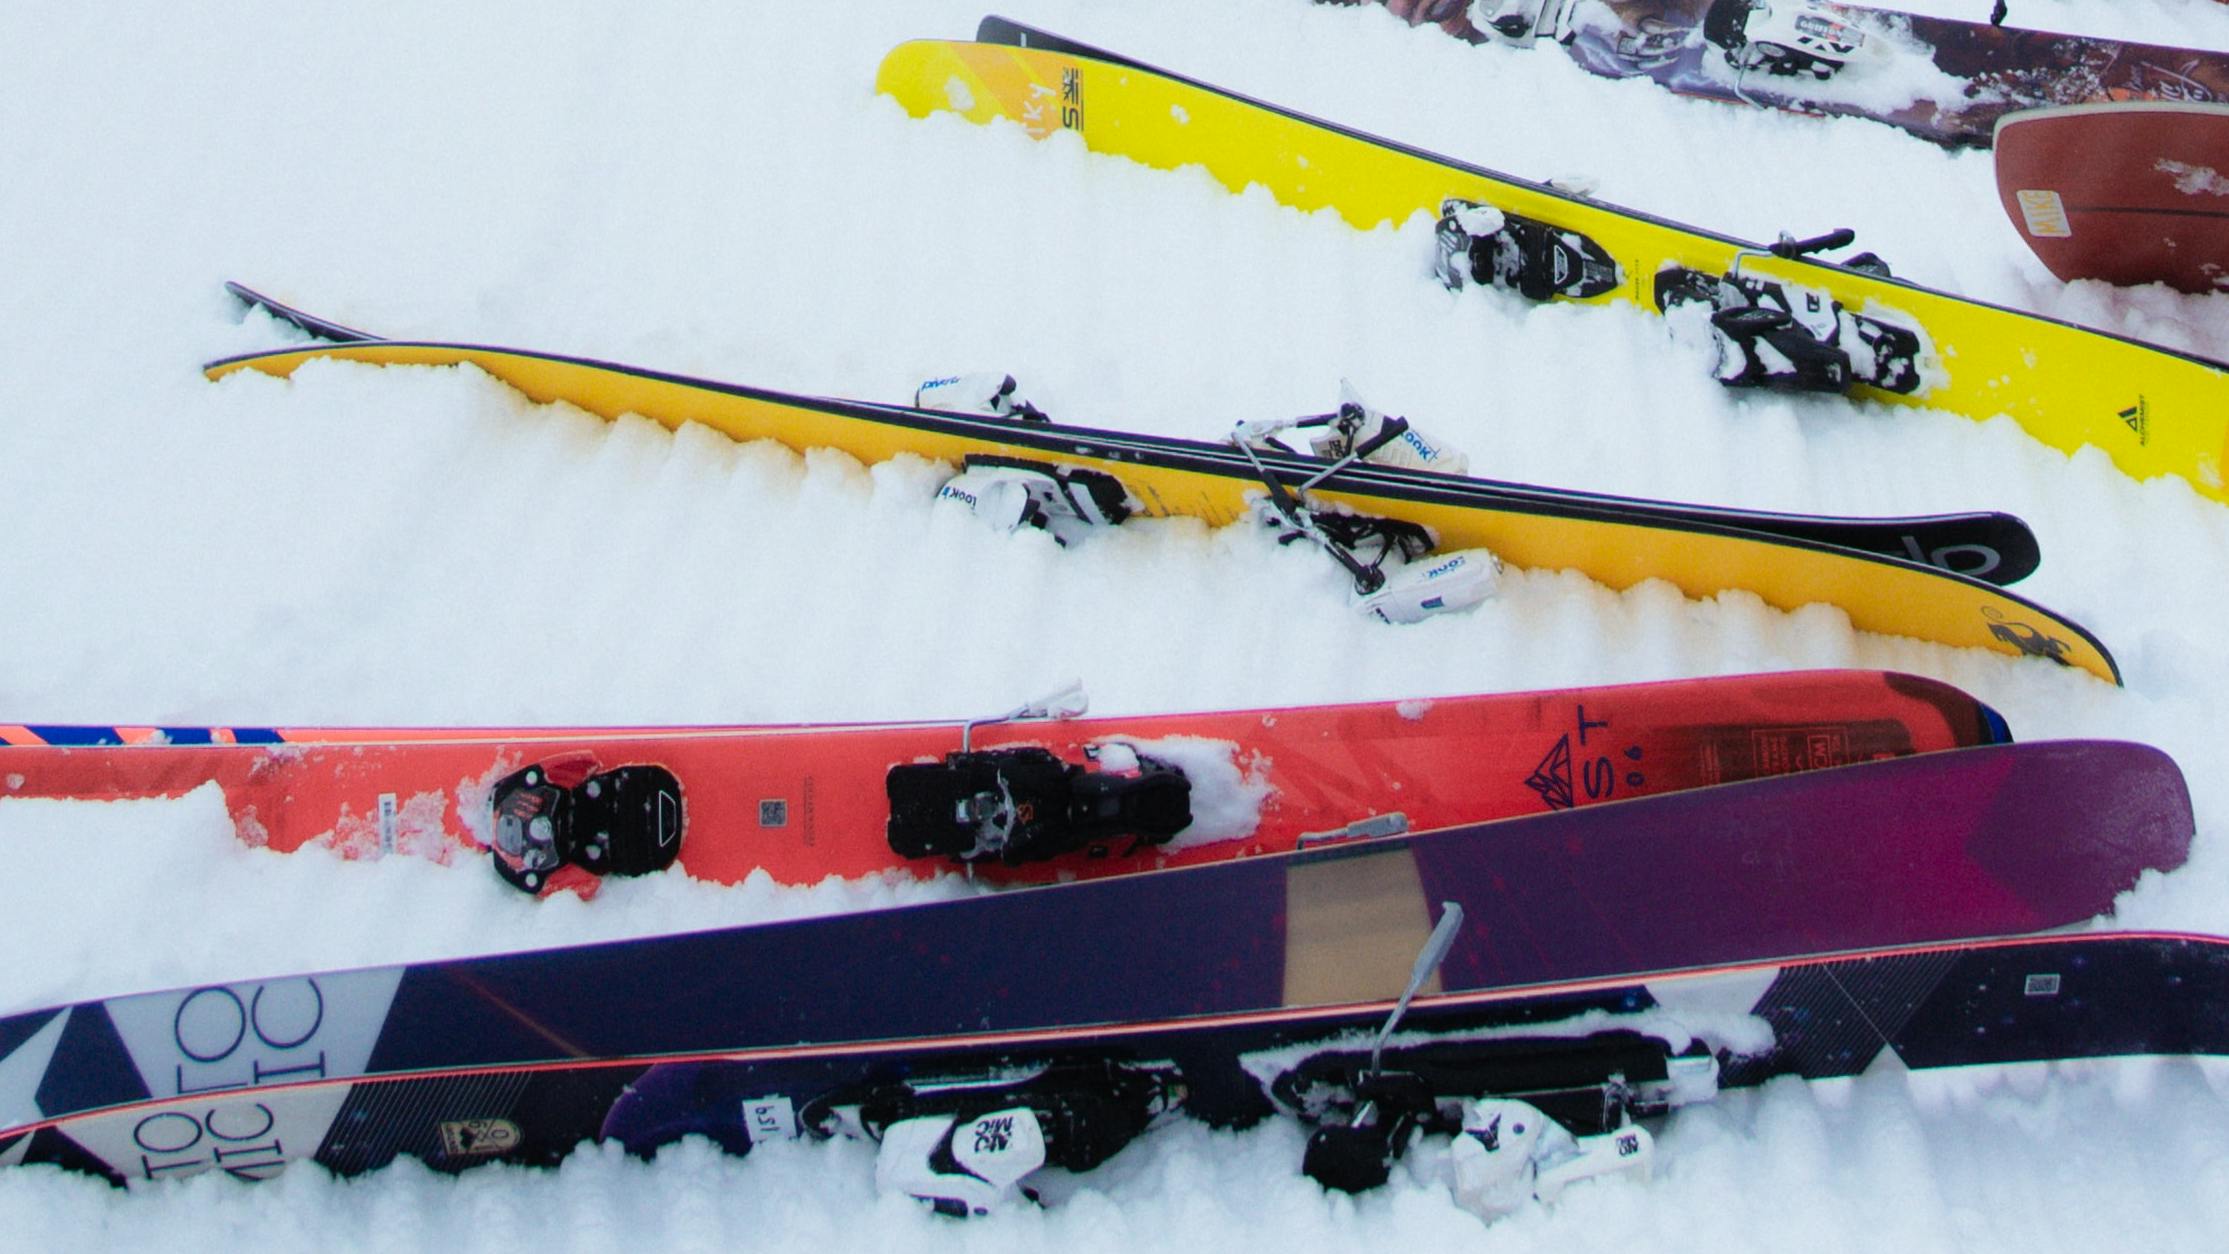 A row of brightly-colored skis lays down in the snow. 